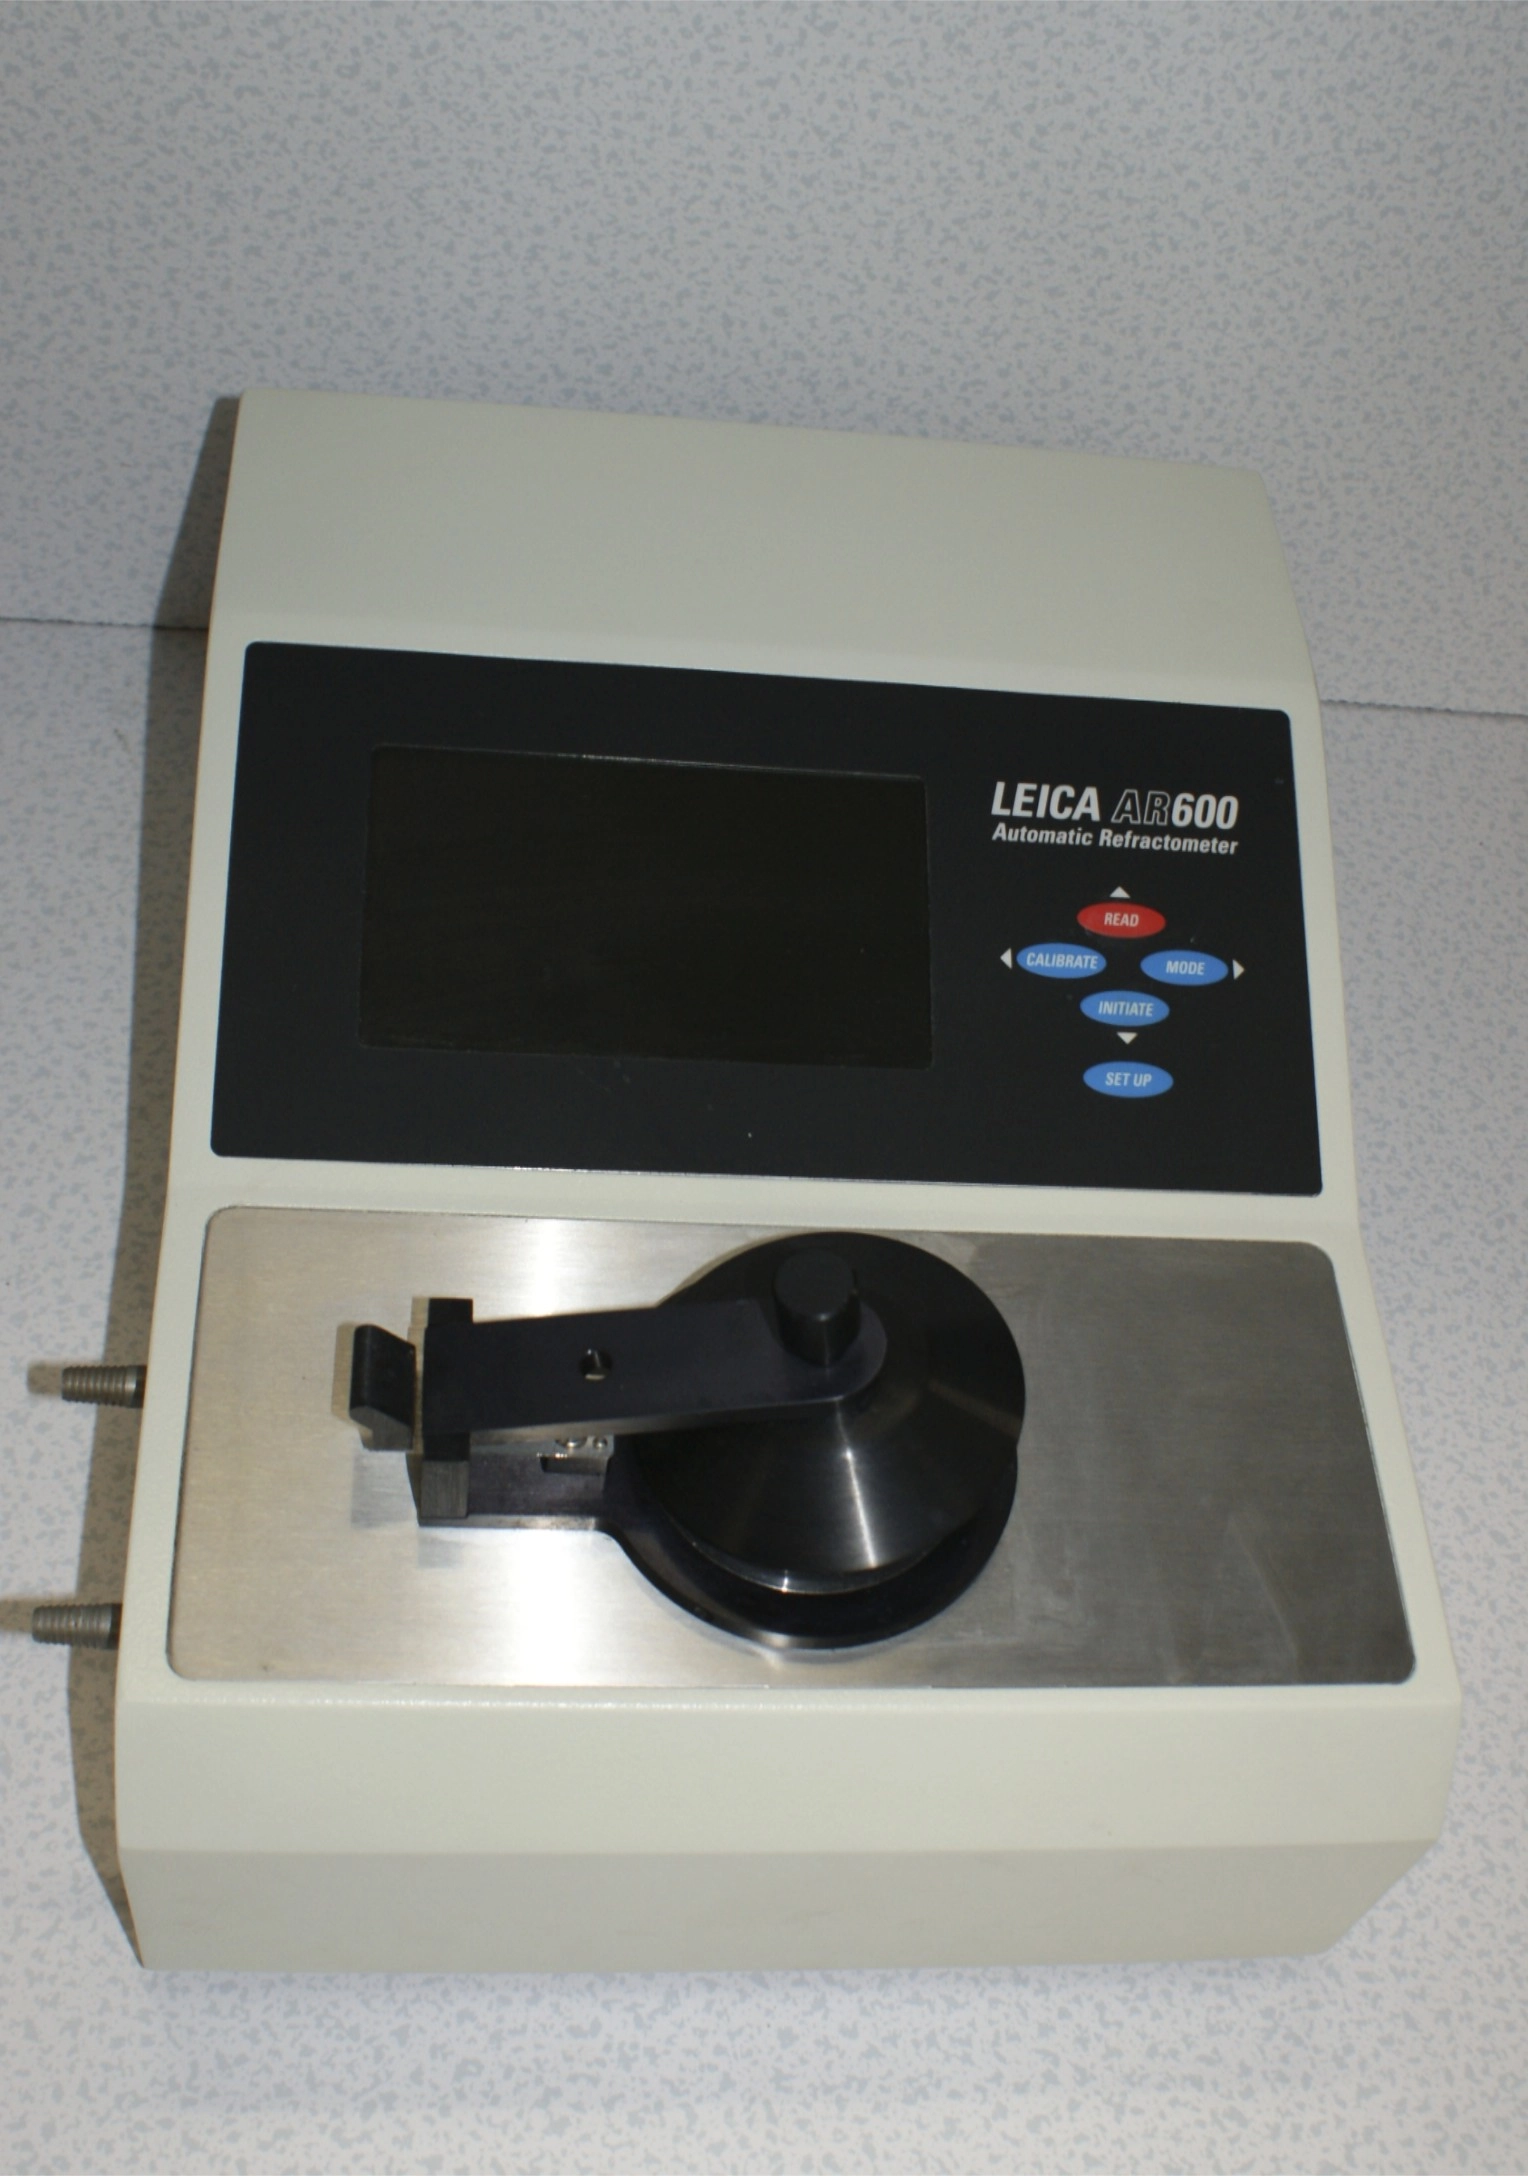 Leica AR600 Automatic Refractometer used nice Reichert Jung Autoabbe Refractometer 10500 used Reichert Jung 10500 Autoabbe Re